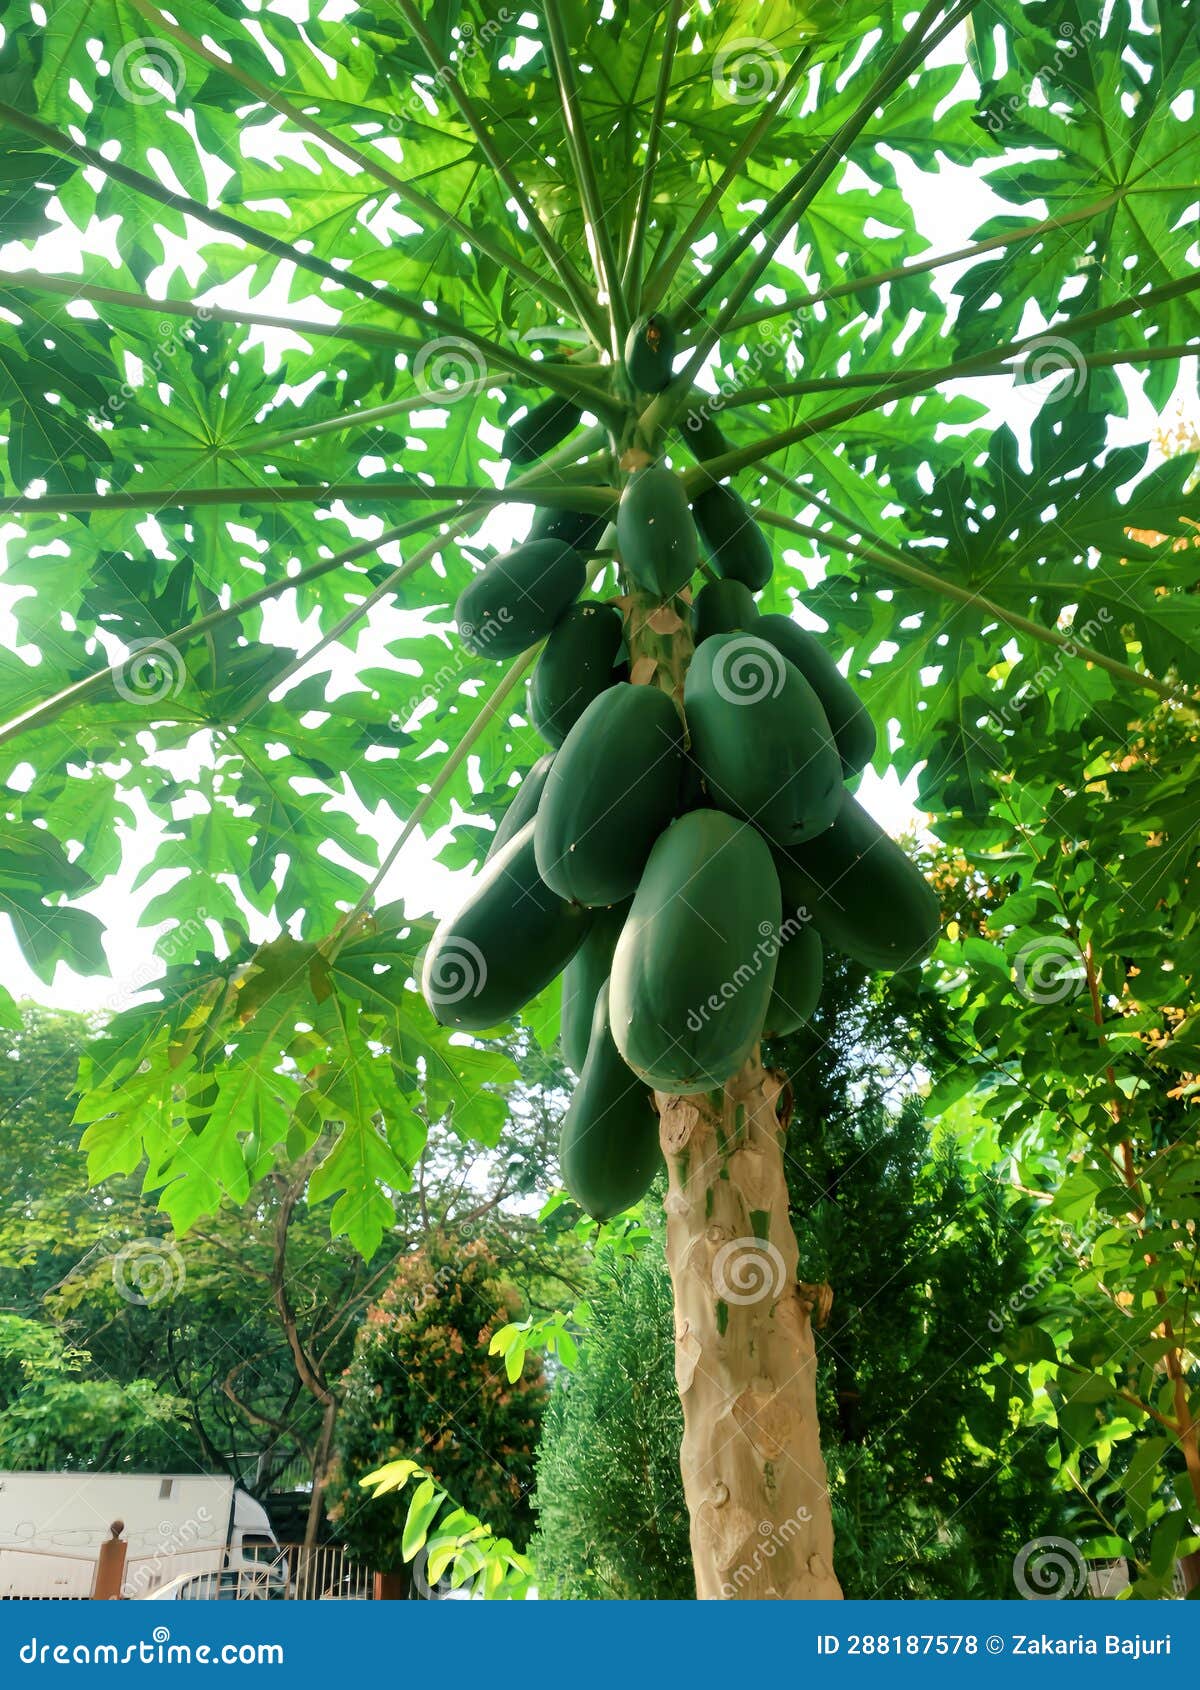 papaya trees are lush and beautiful for the view of the growers